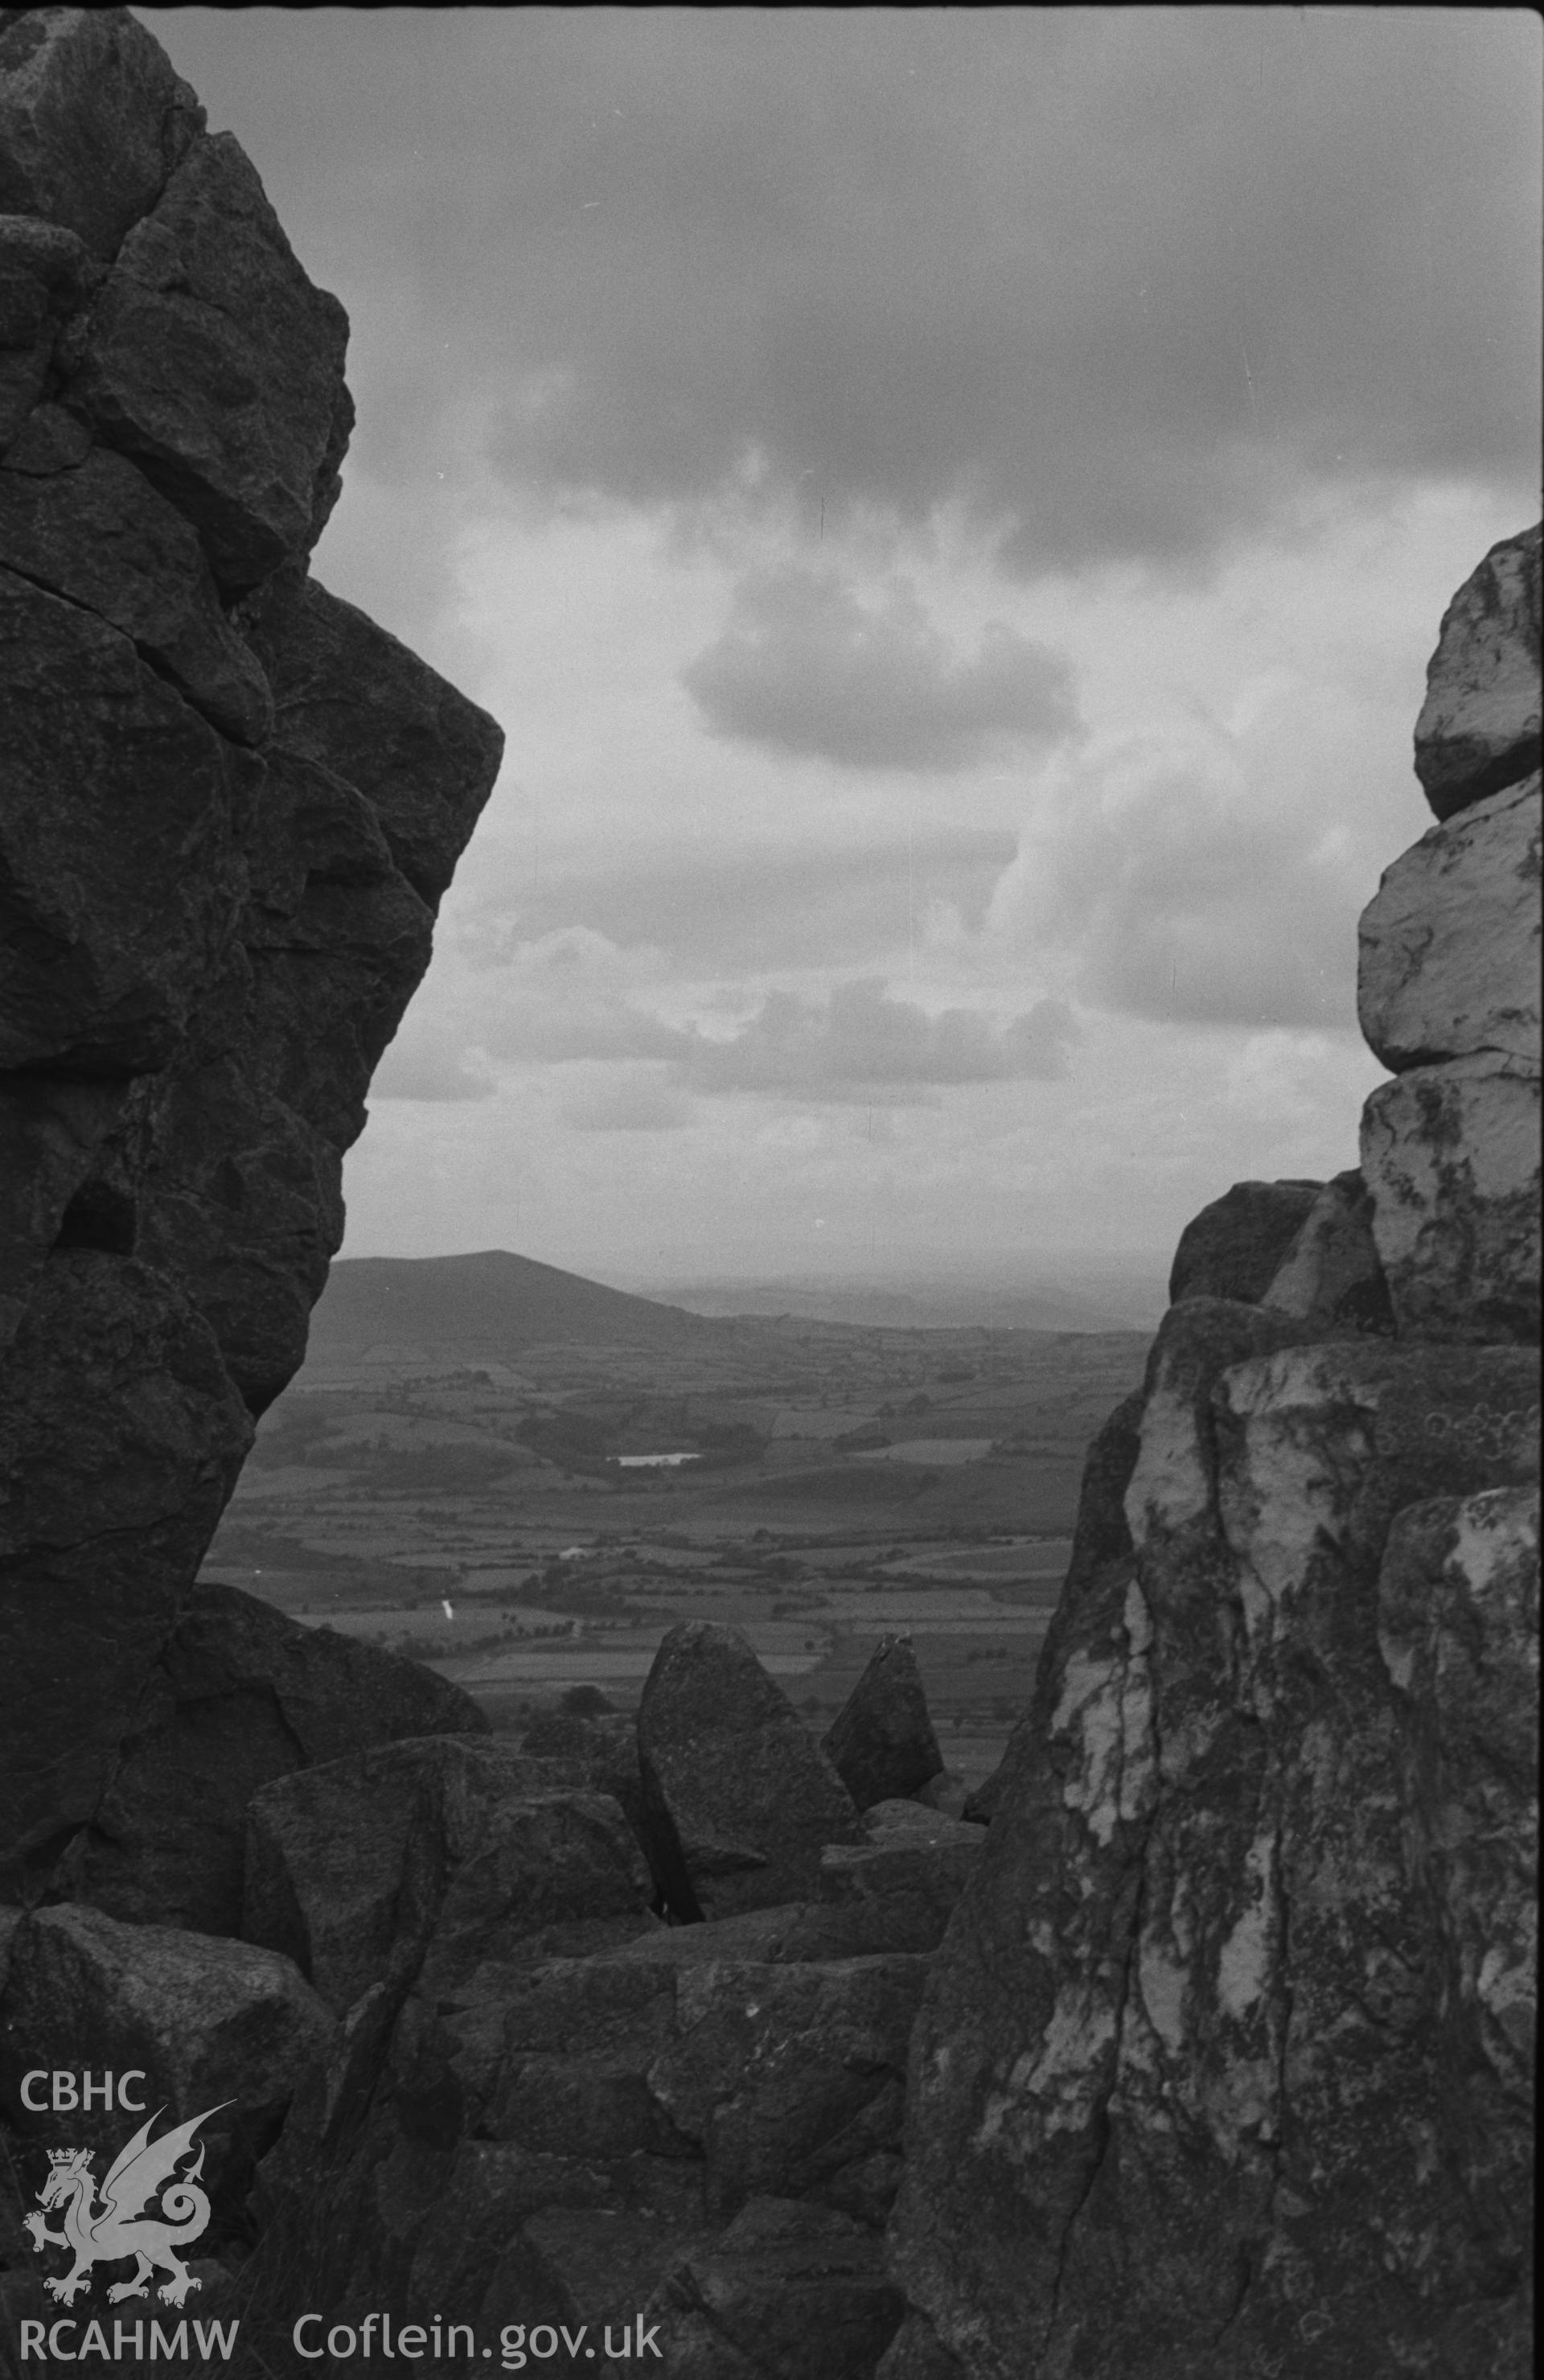 Black and White photograph showing Stiperstones, Shropshire.